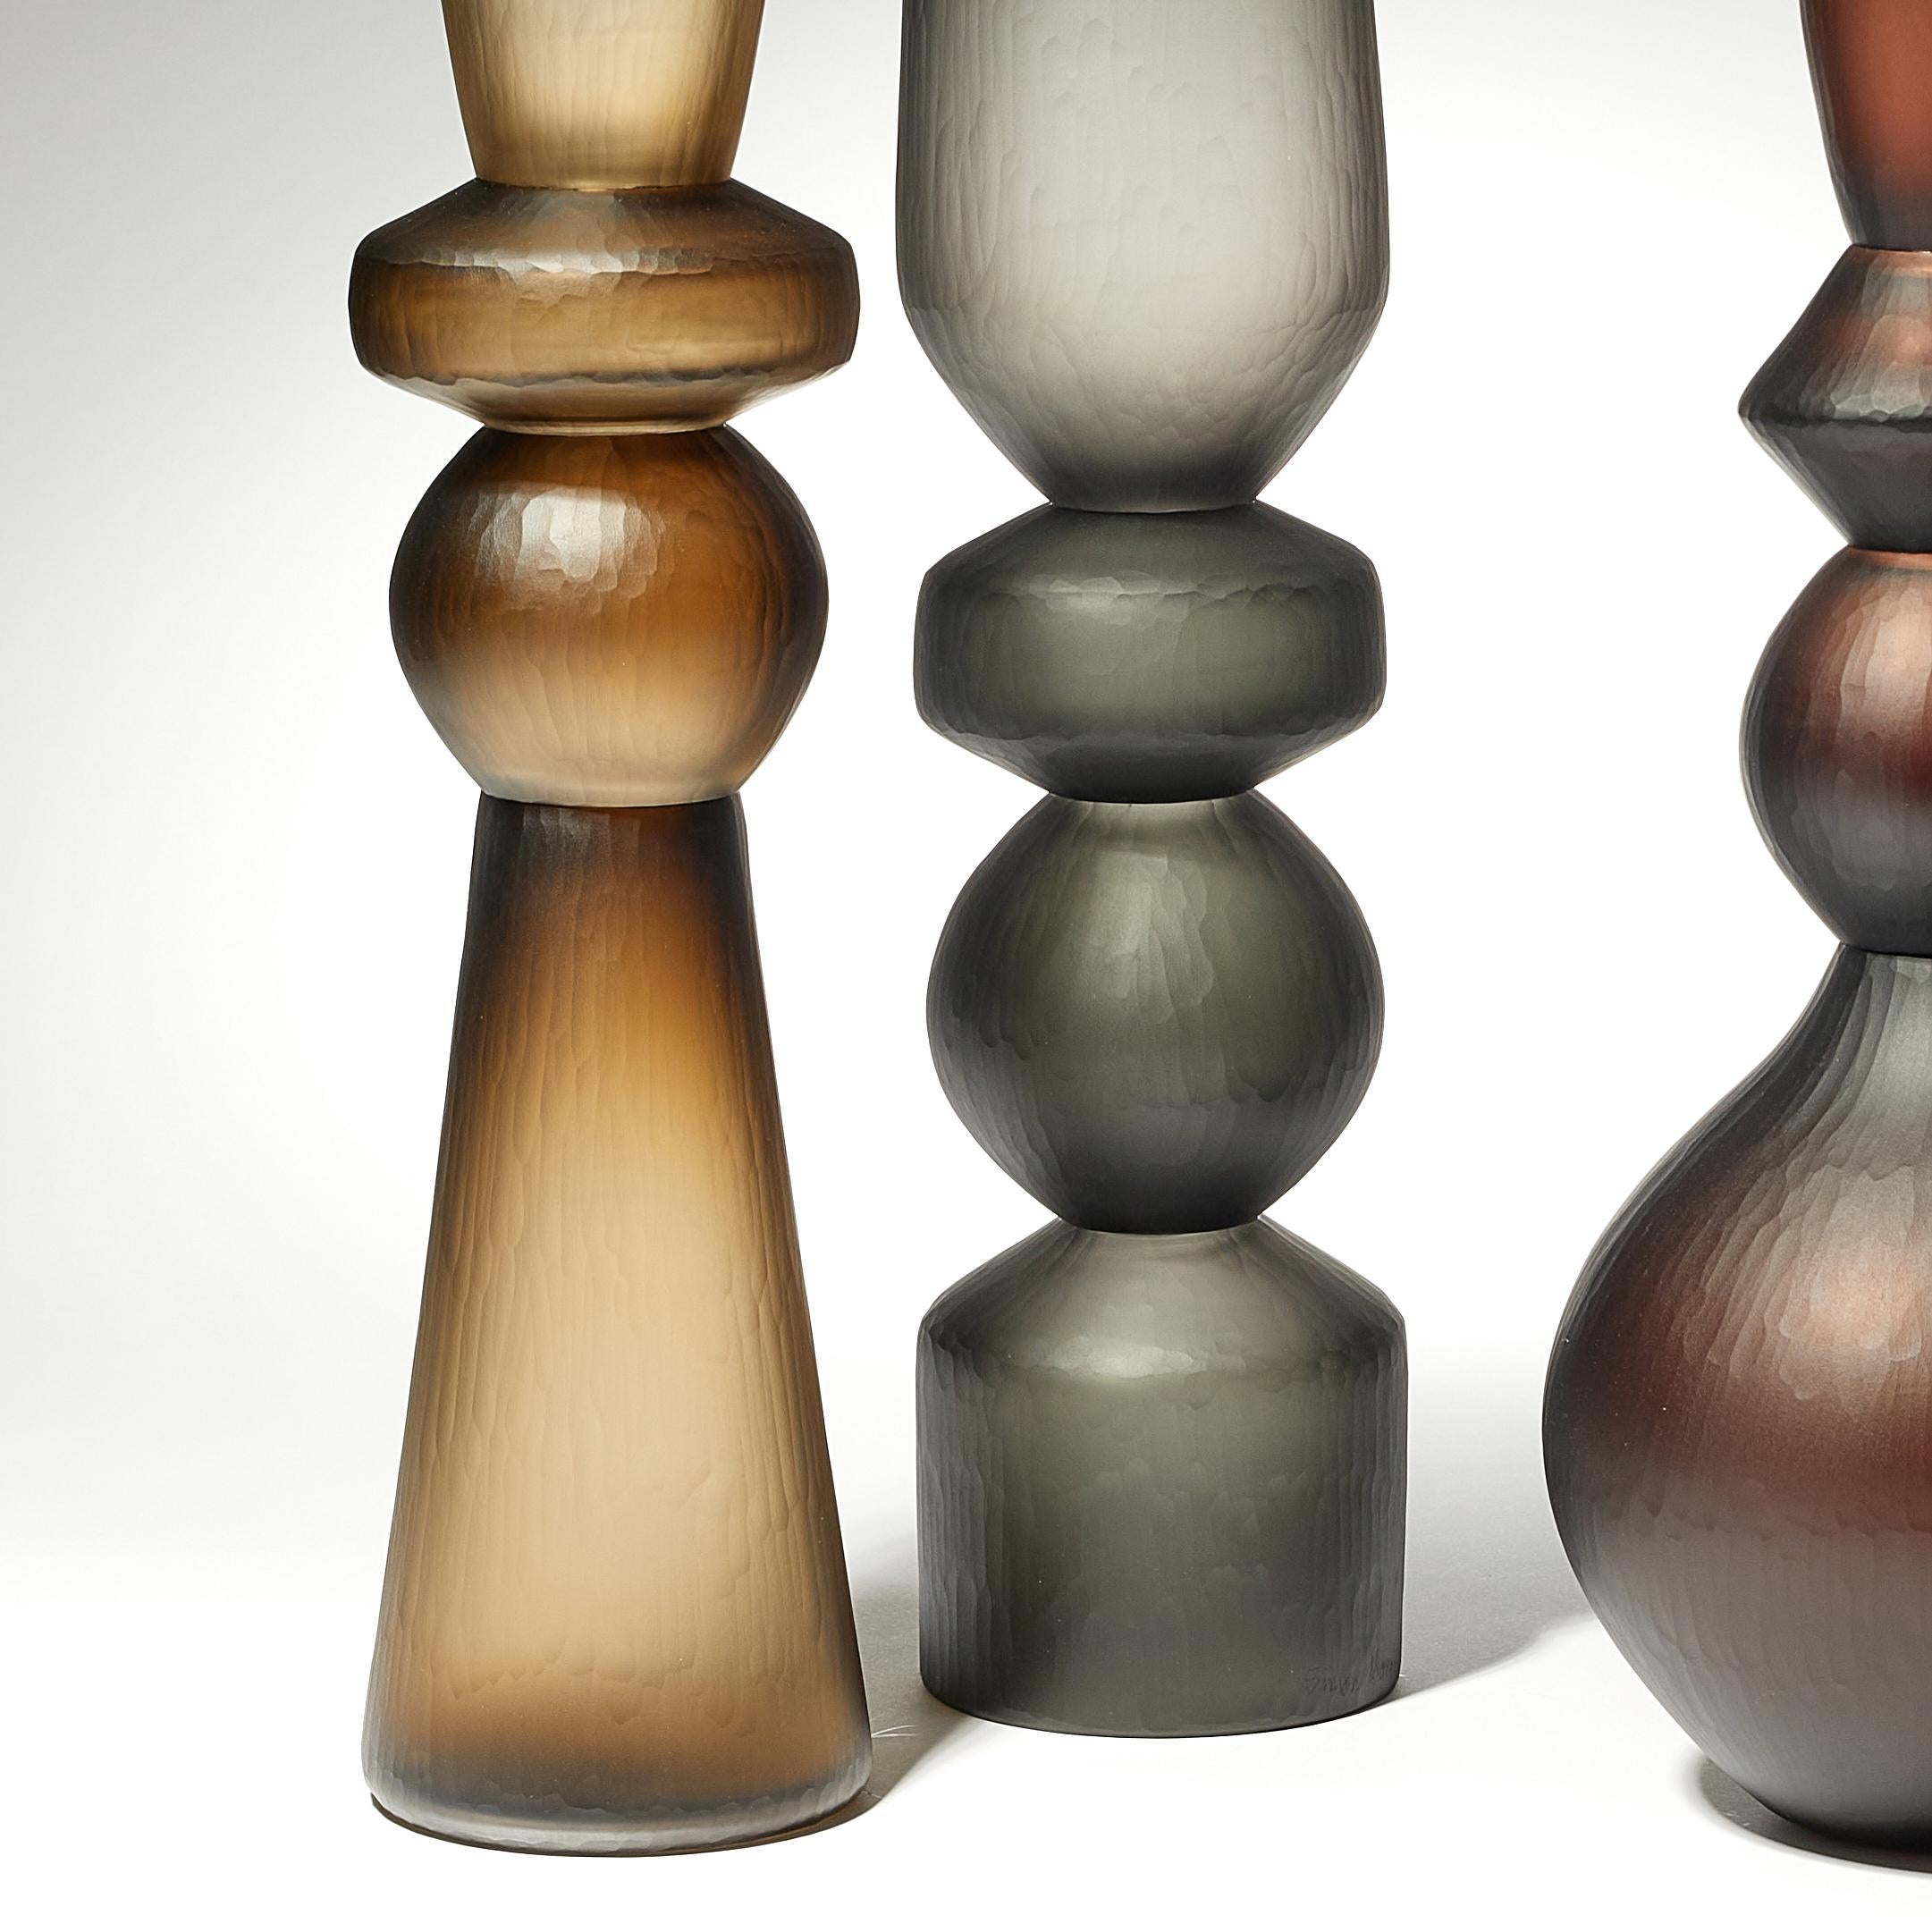 Organic Modern Balustrade Vase Trio, a Group of Olive, Steel & Brown Glass Vases by Simon Moore